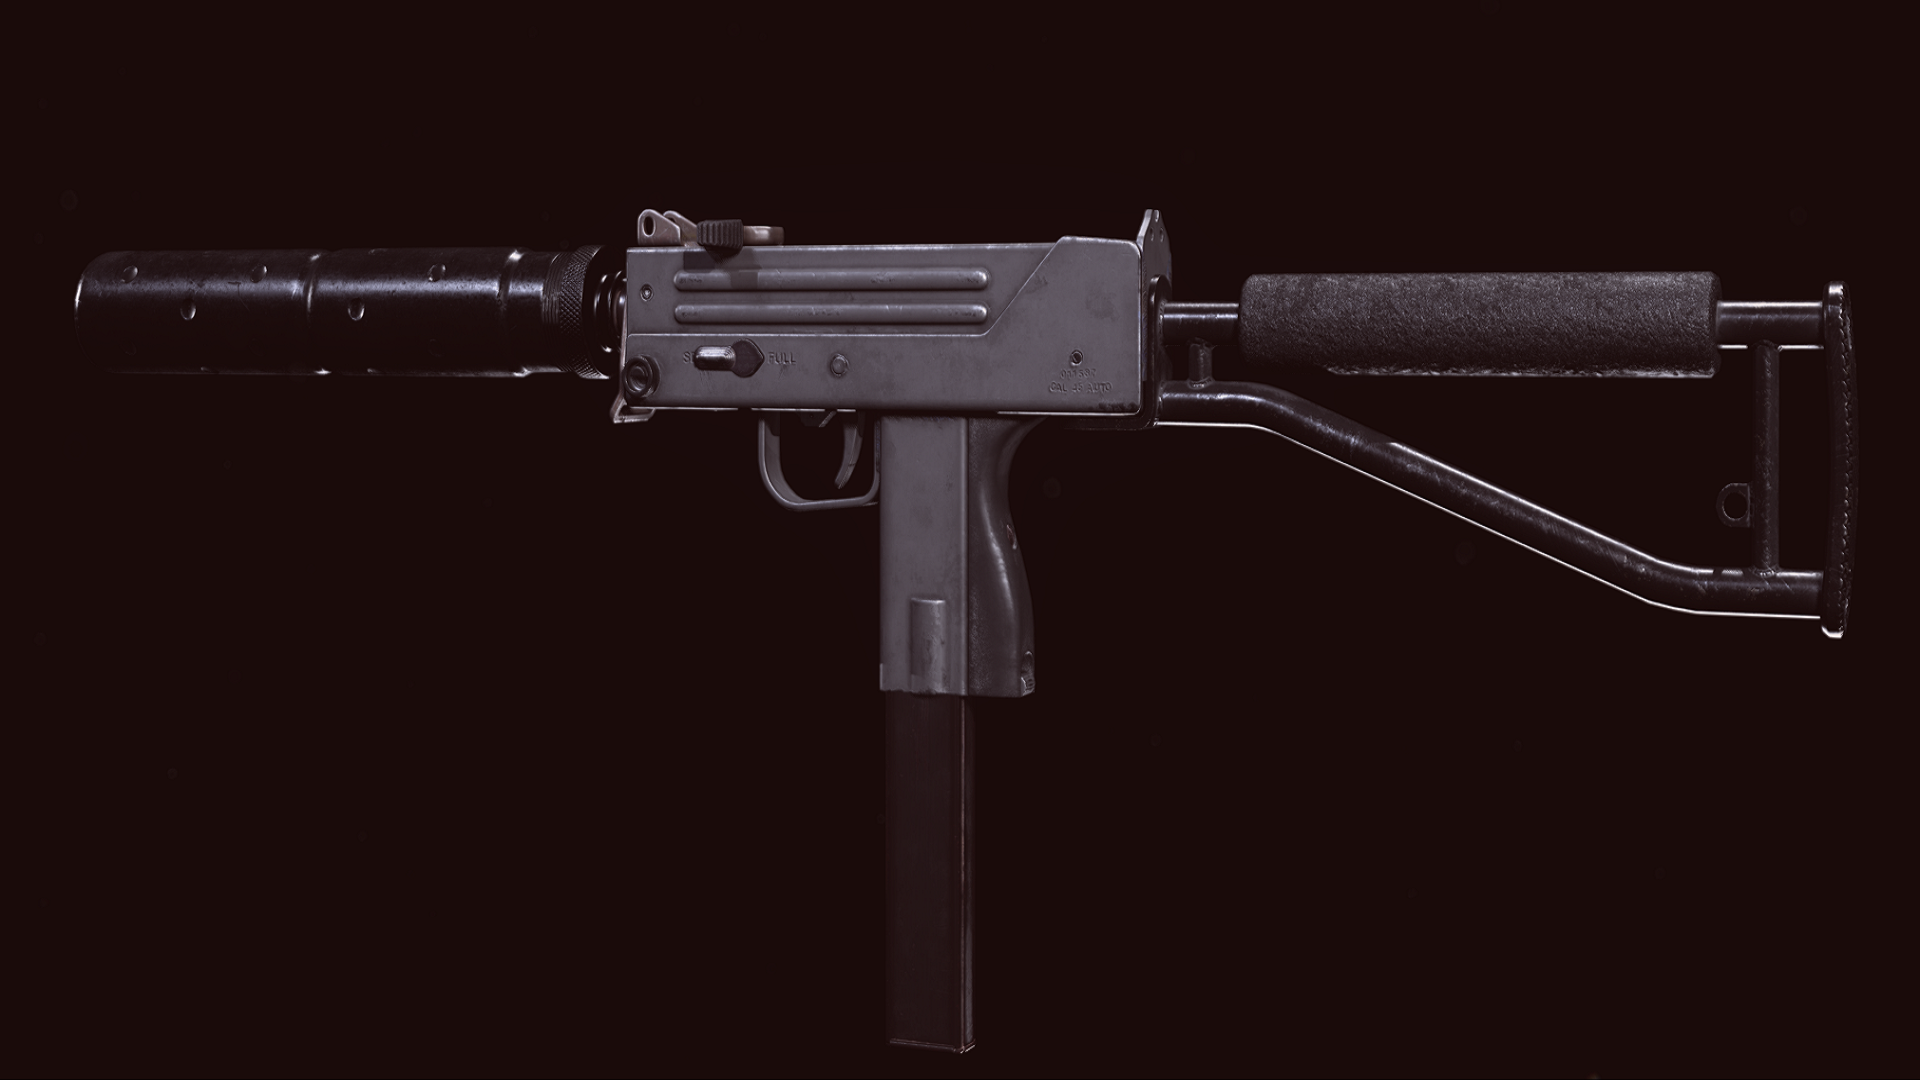 The MAC-10 in Warzone